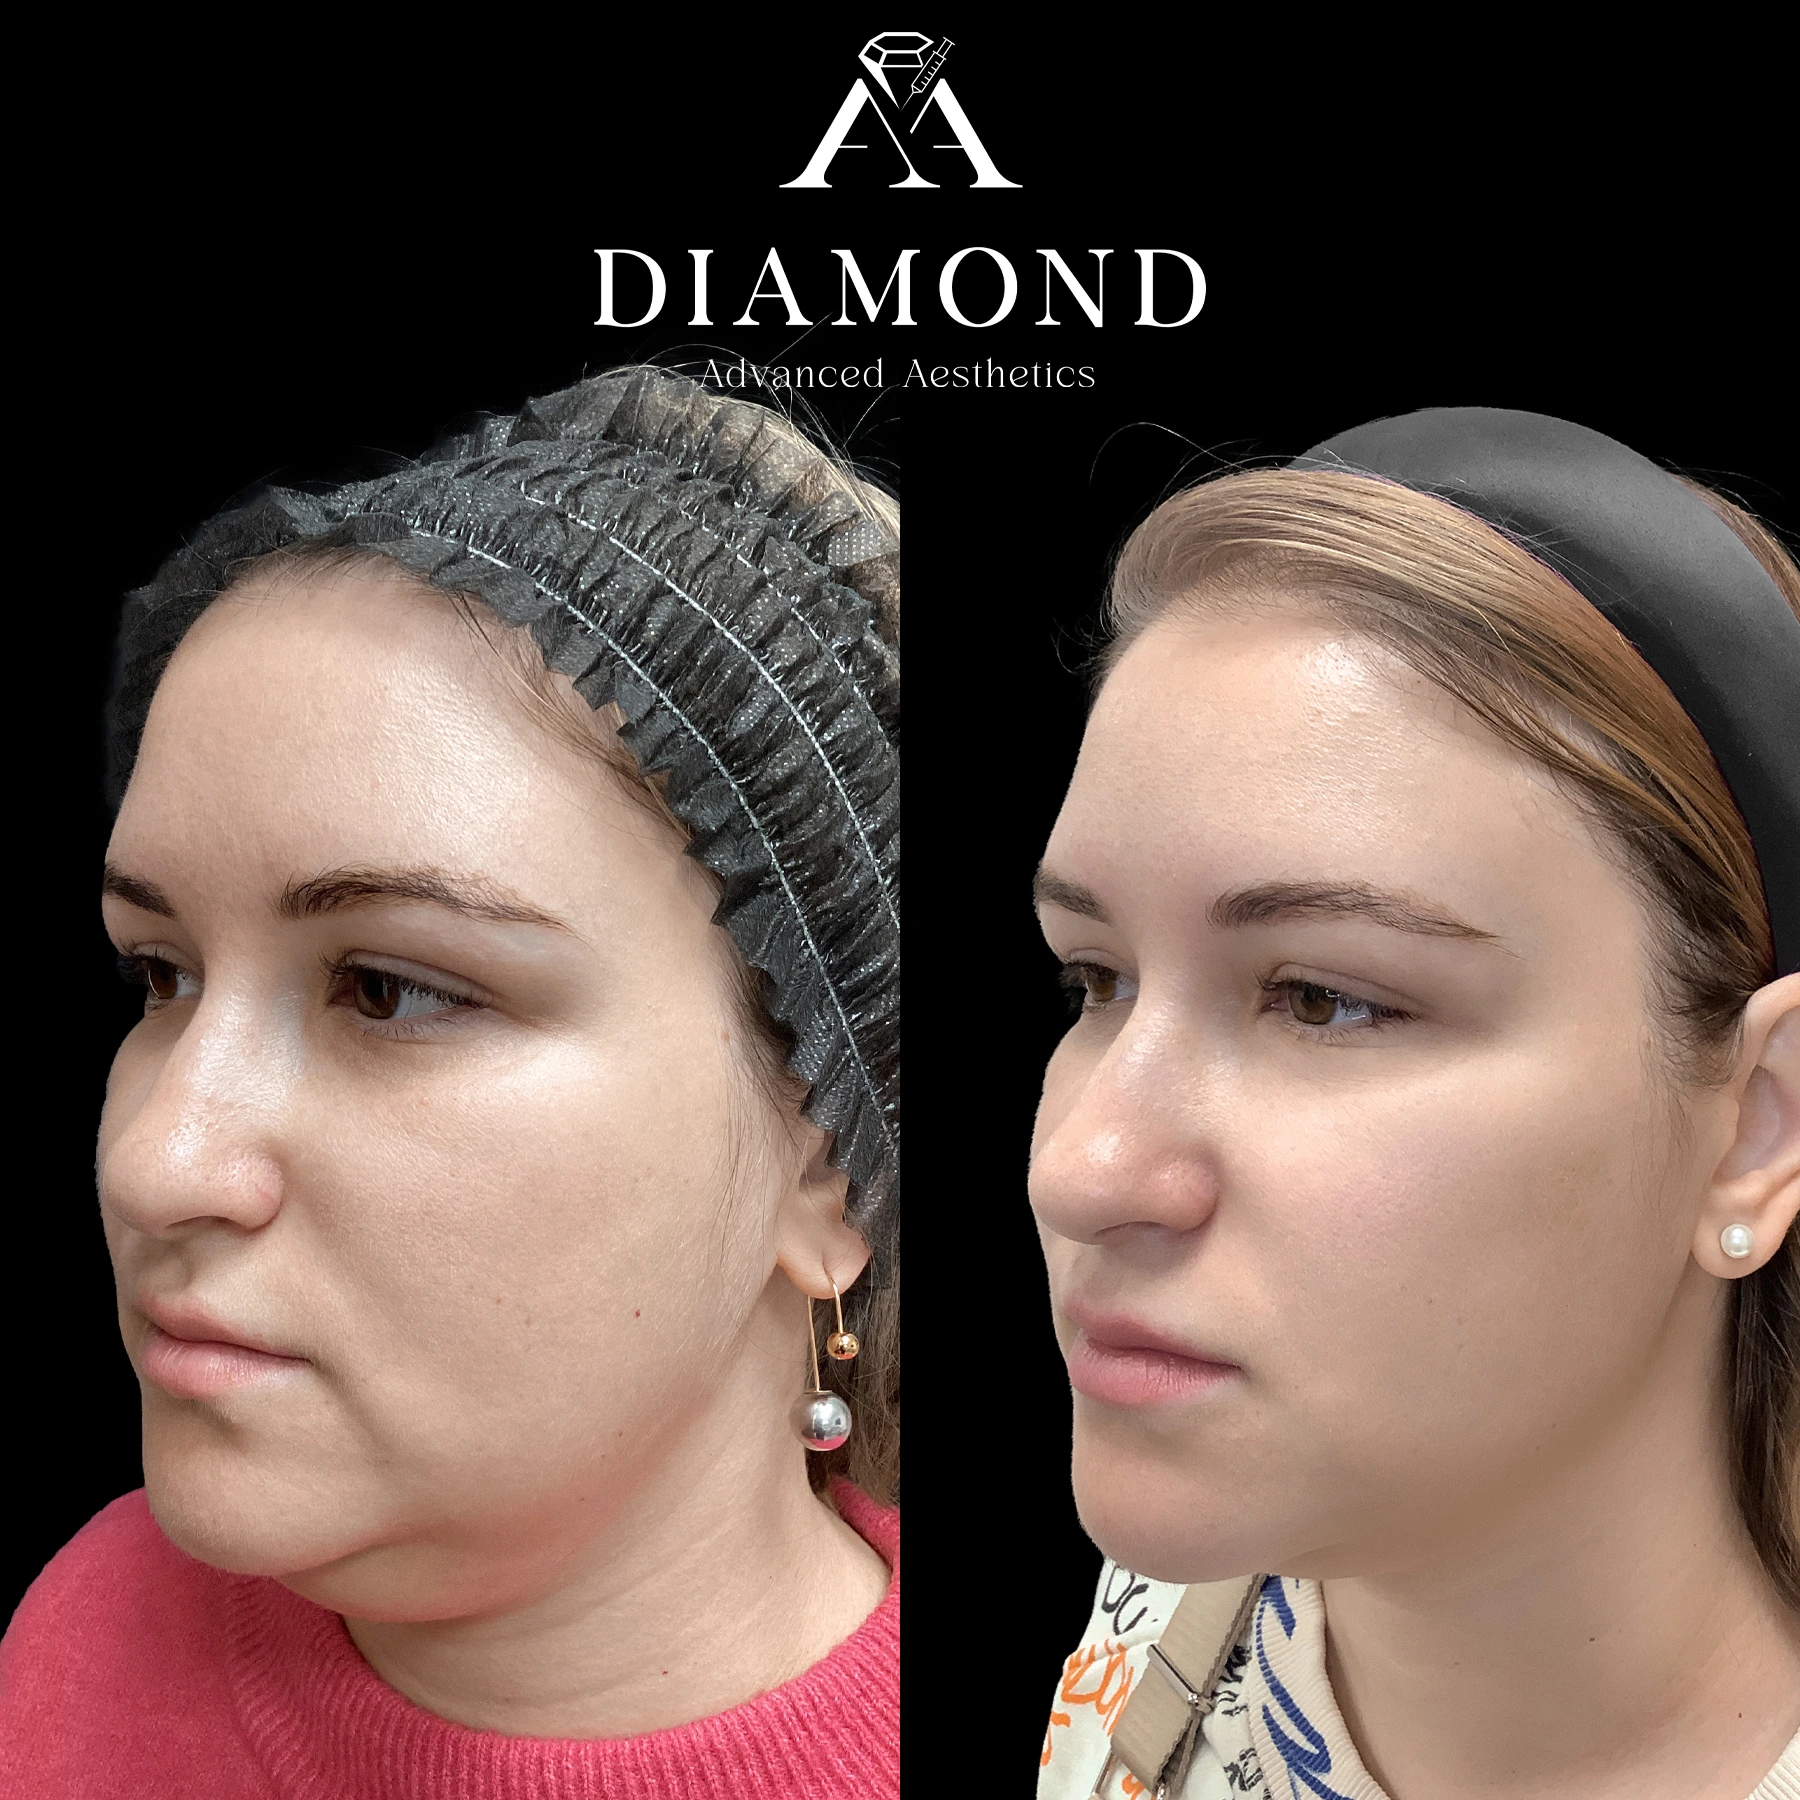 Before and After |diamond advanced aesthetics | New york|